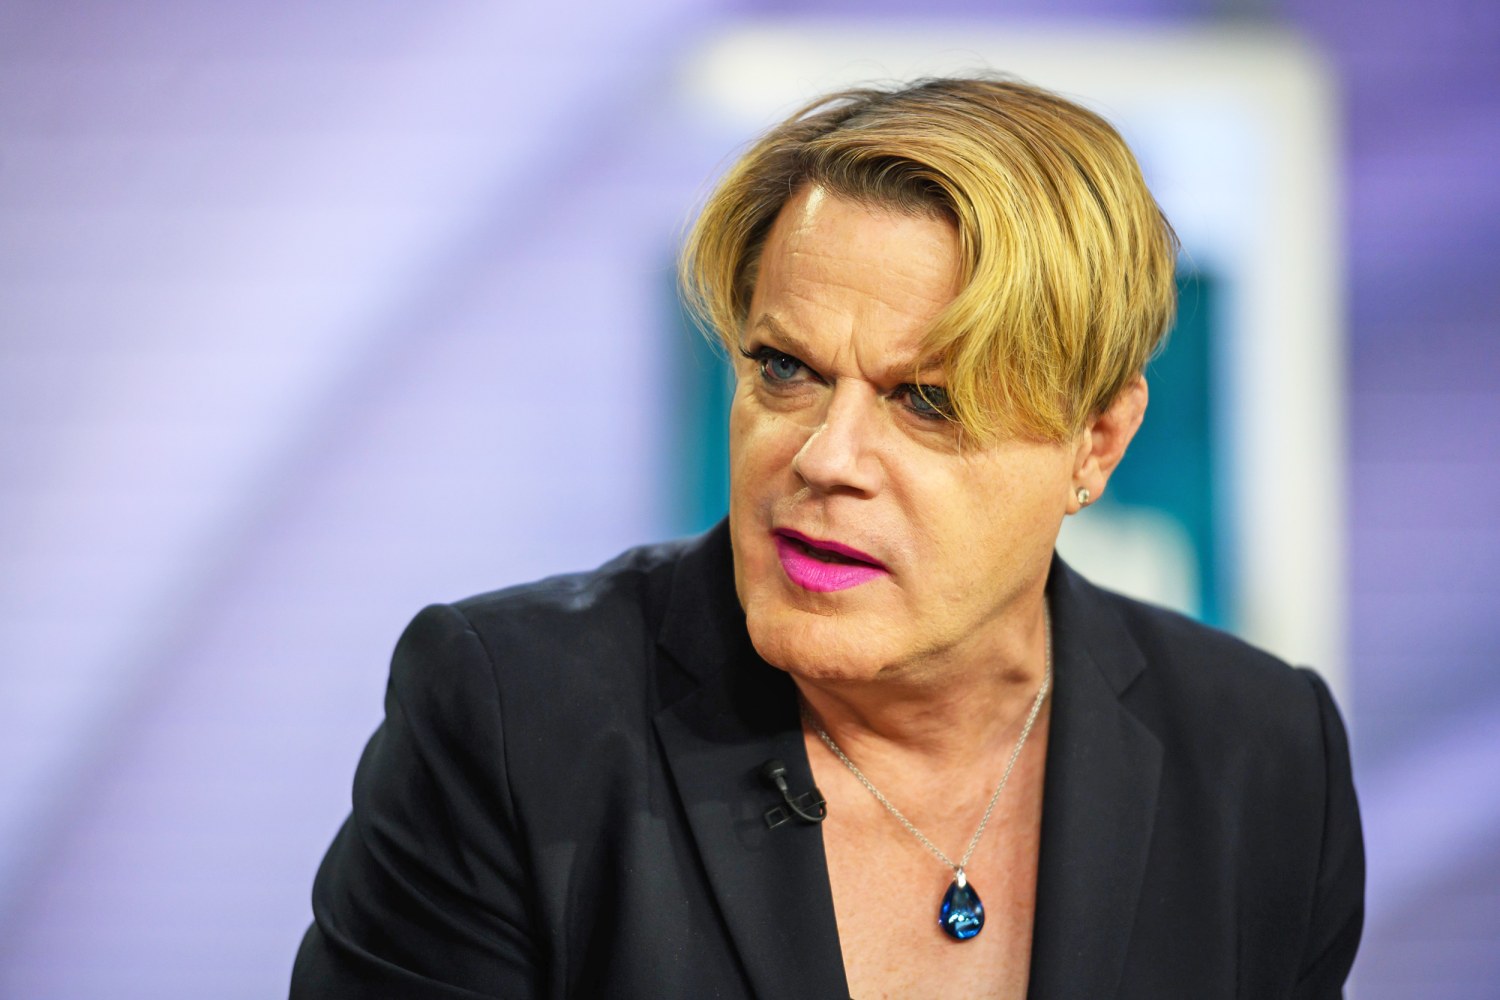 Comedian Eddie Izzard gets wave of support for using she/her pronouns